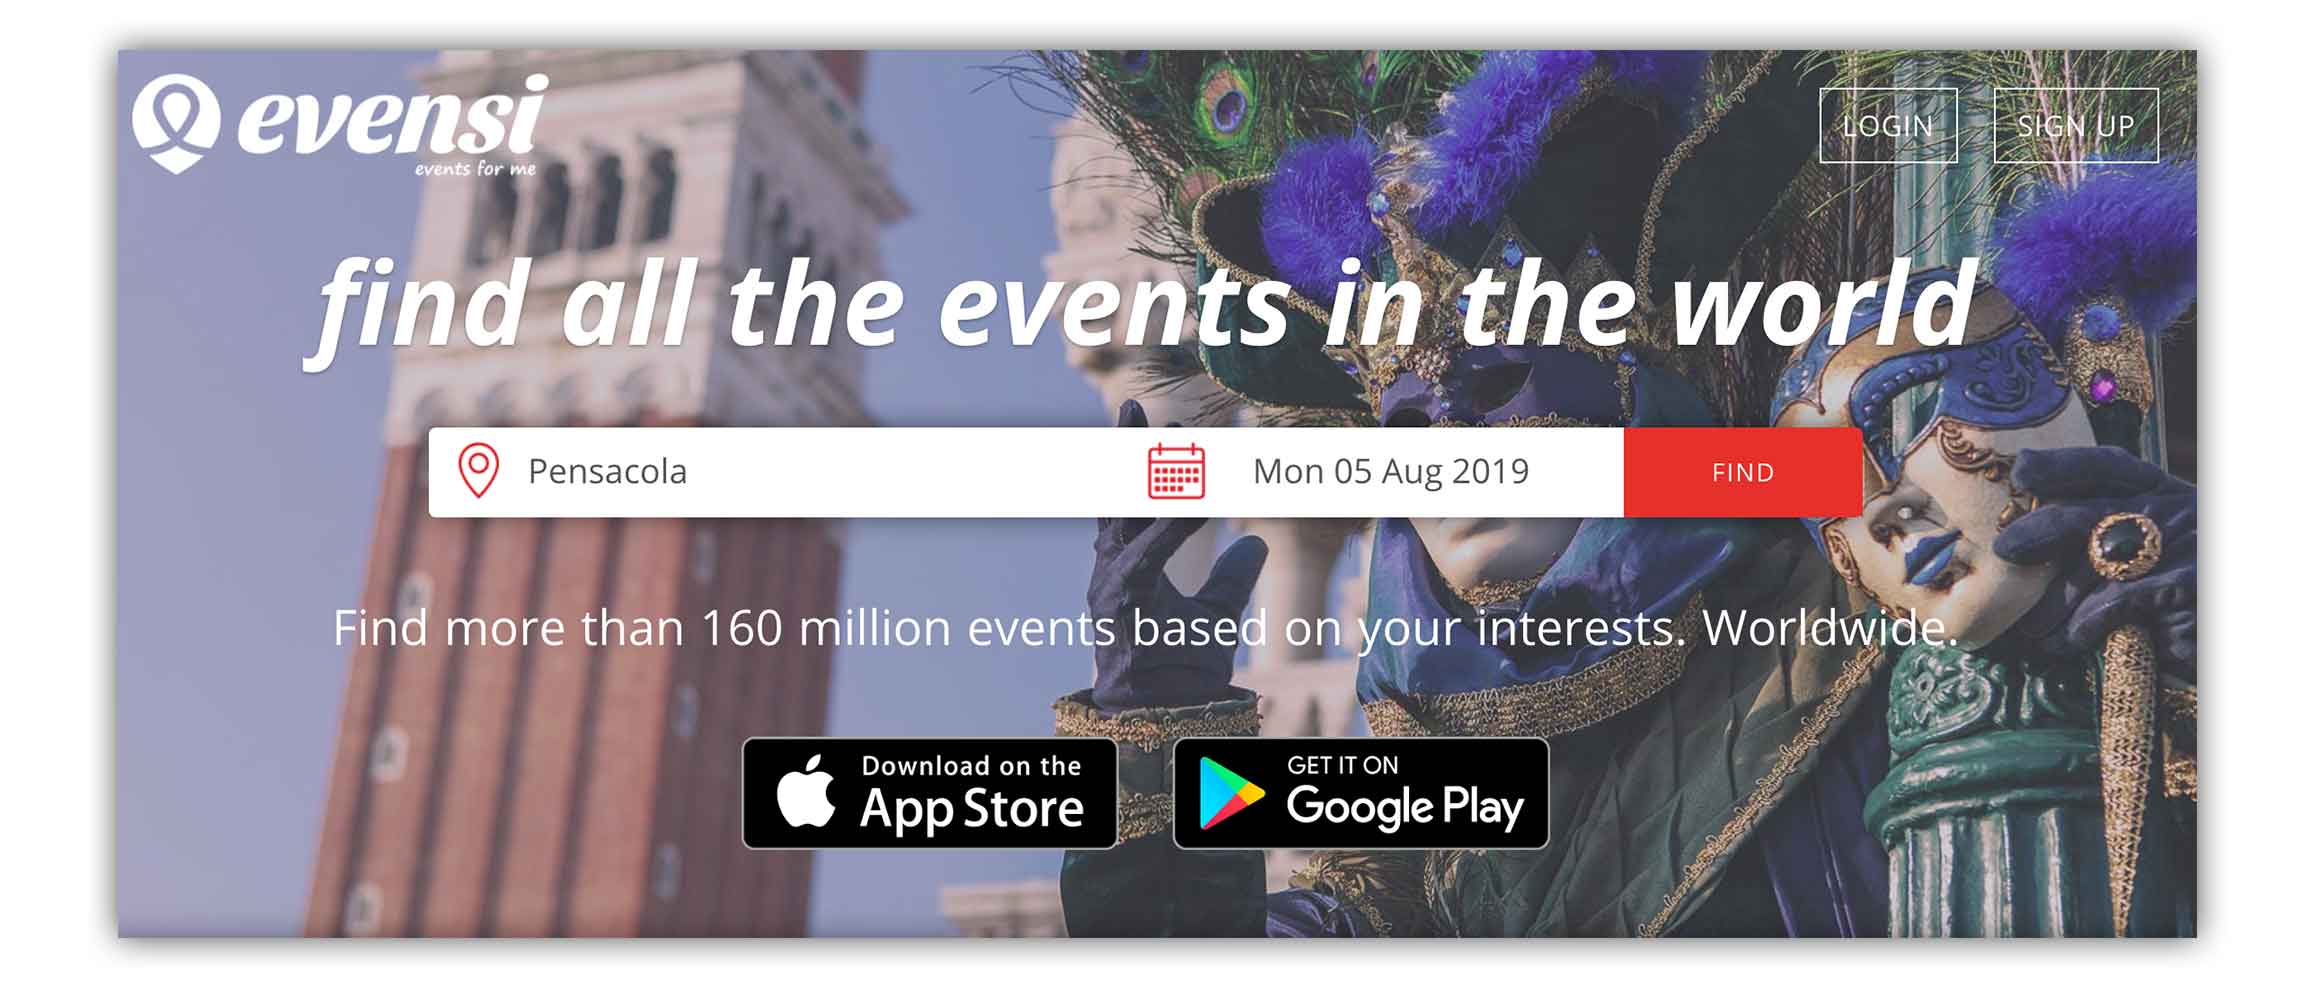 evensi sites for events